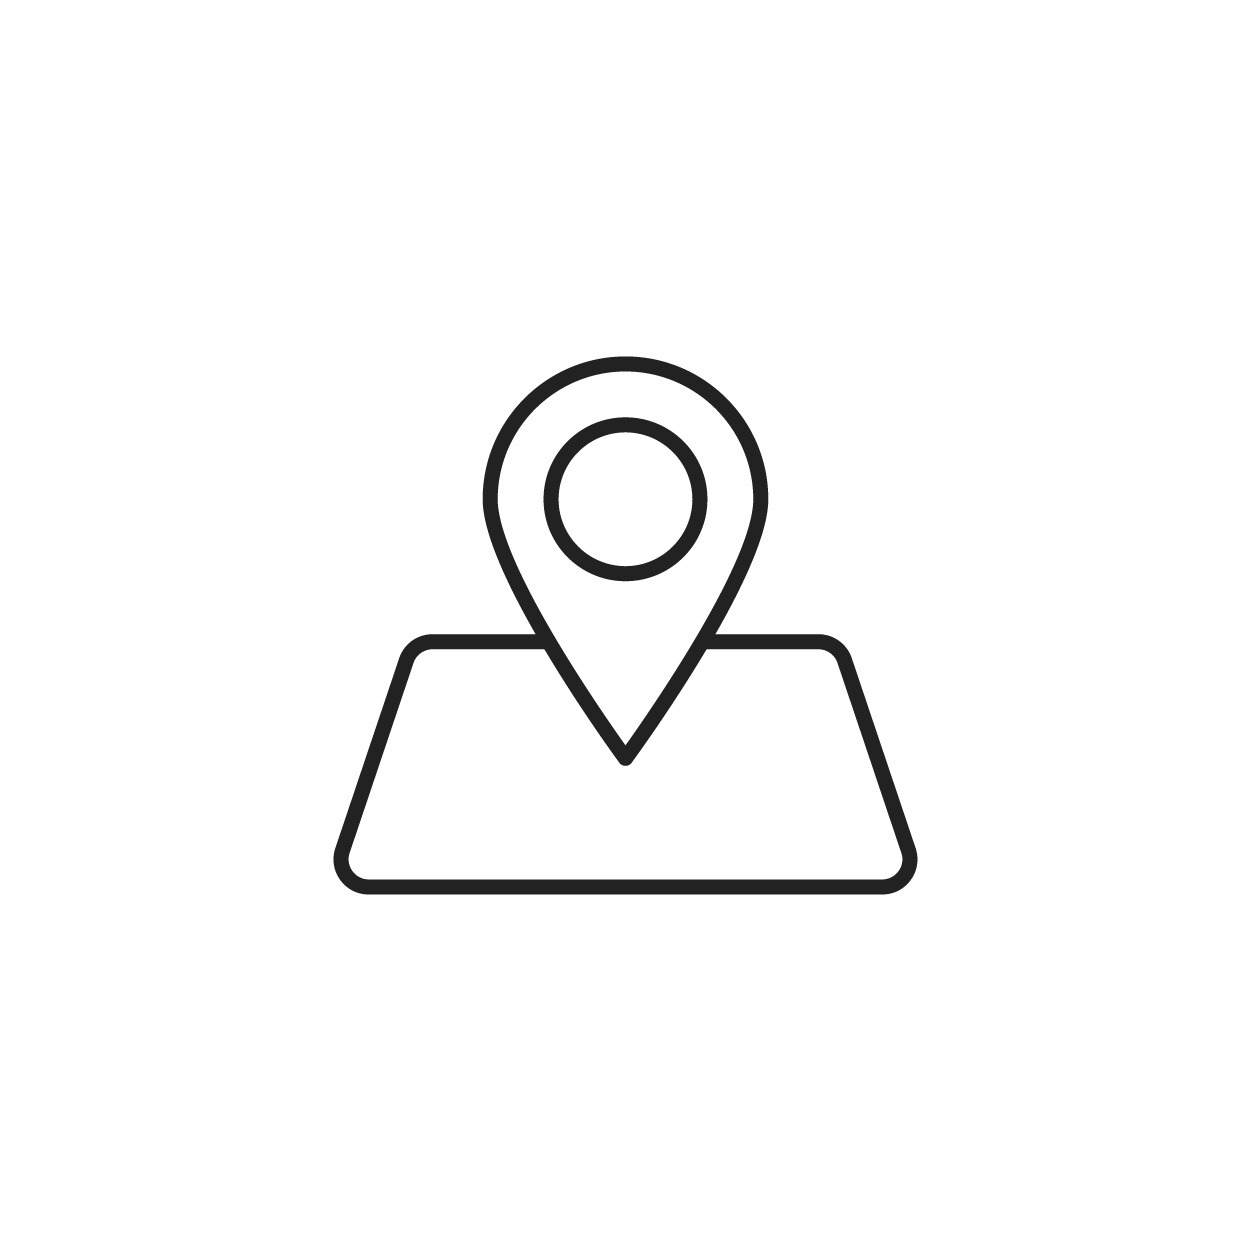 location icon outline